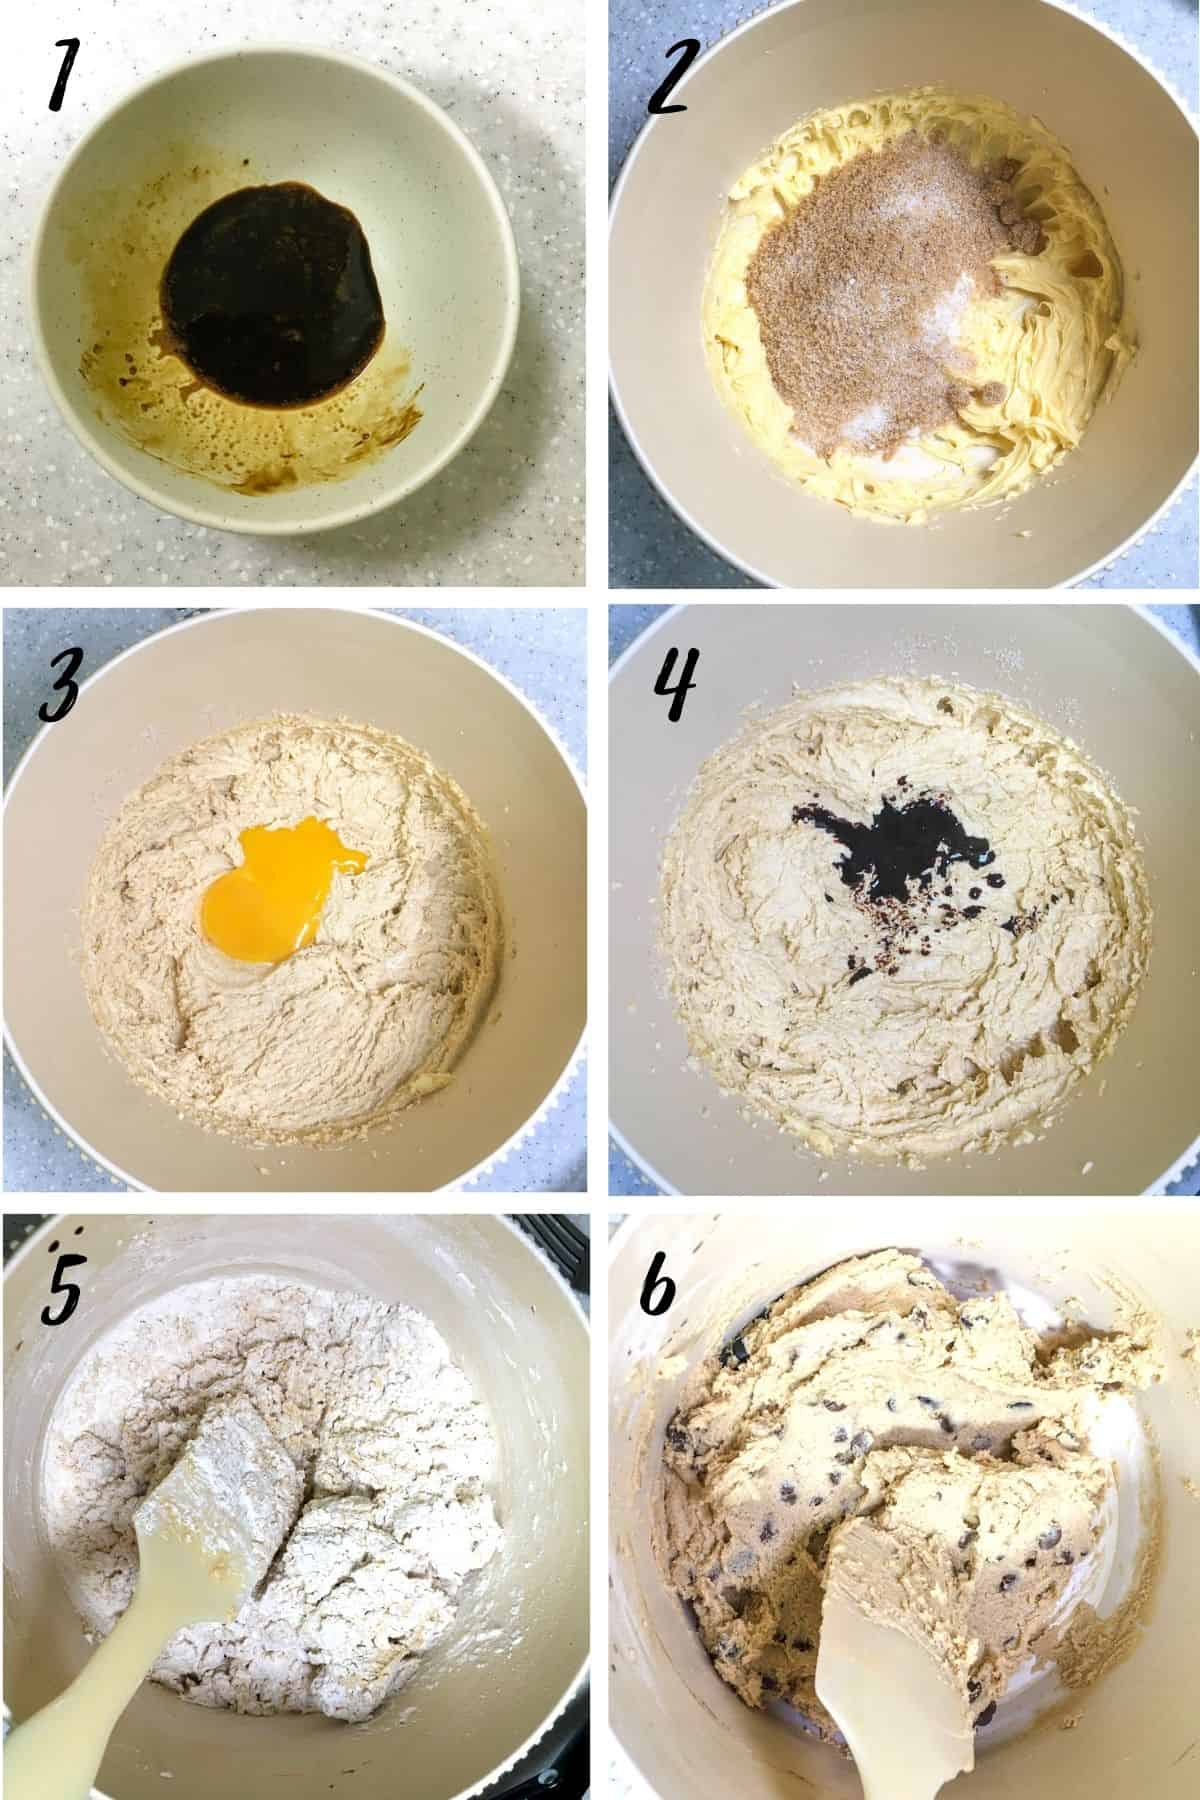 A poster of 6 images show how to mix dough.